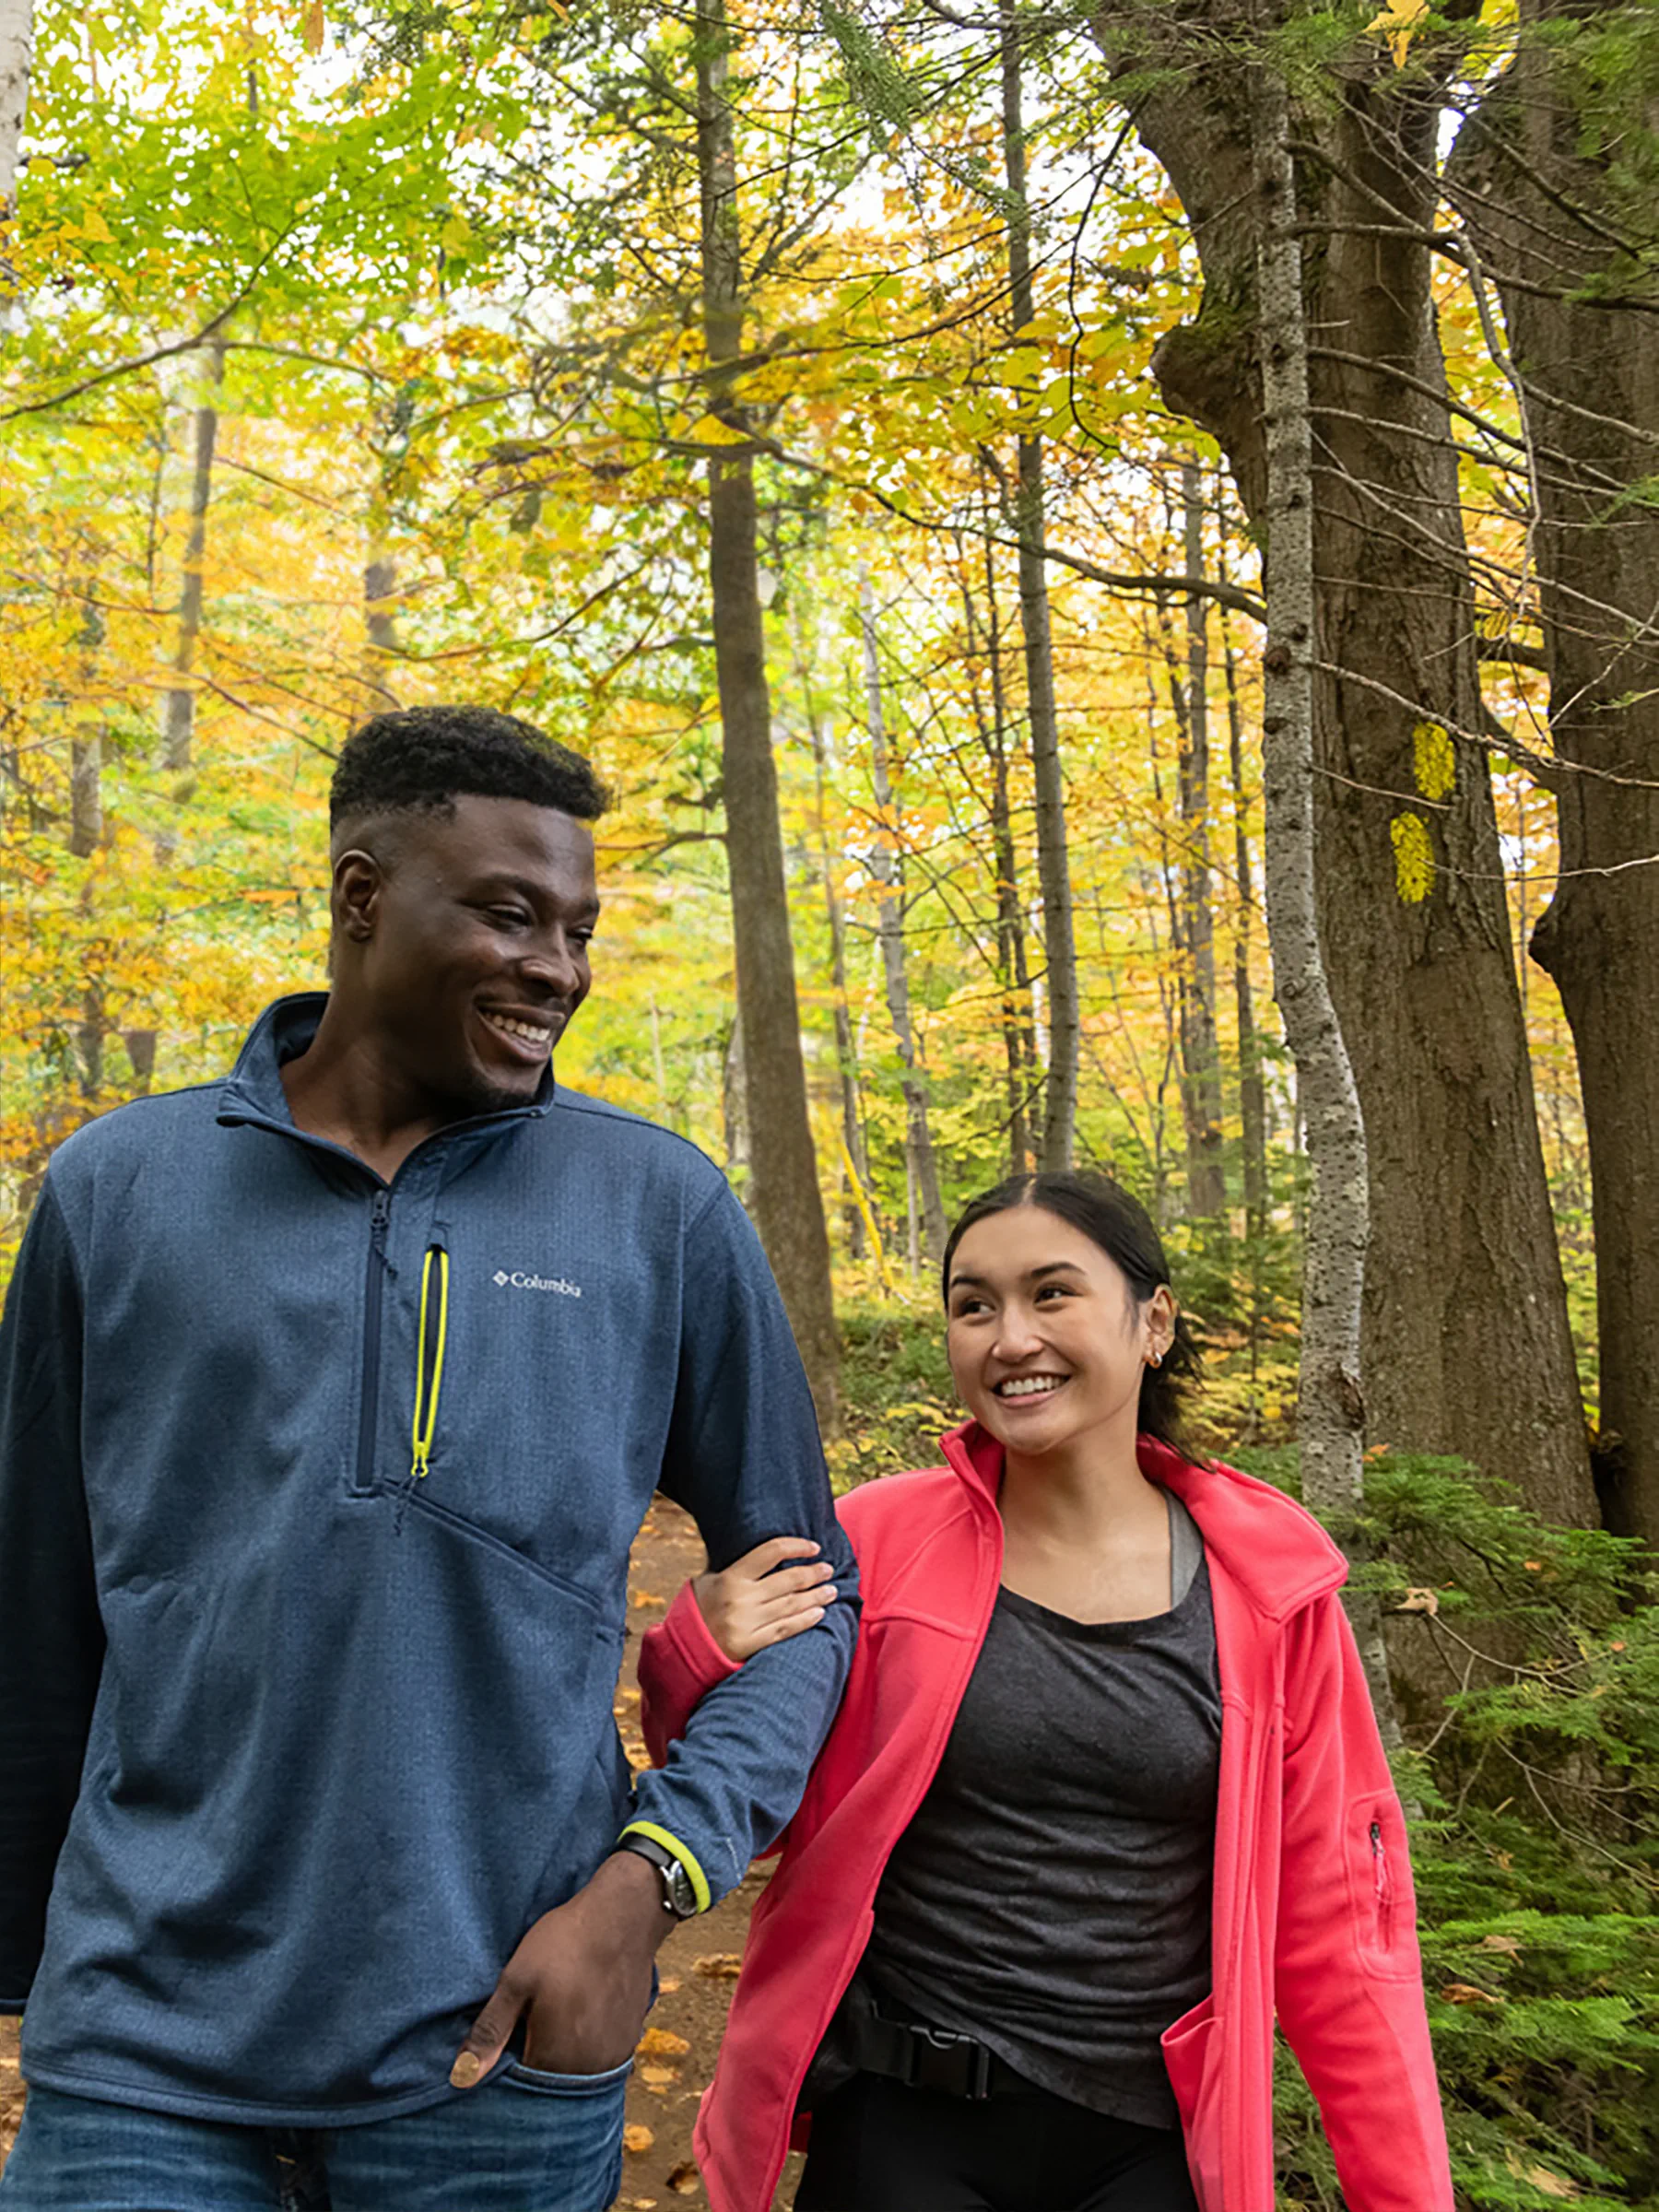 Two friends enjoying a hike in a forest during autumn.